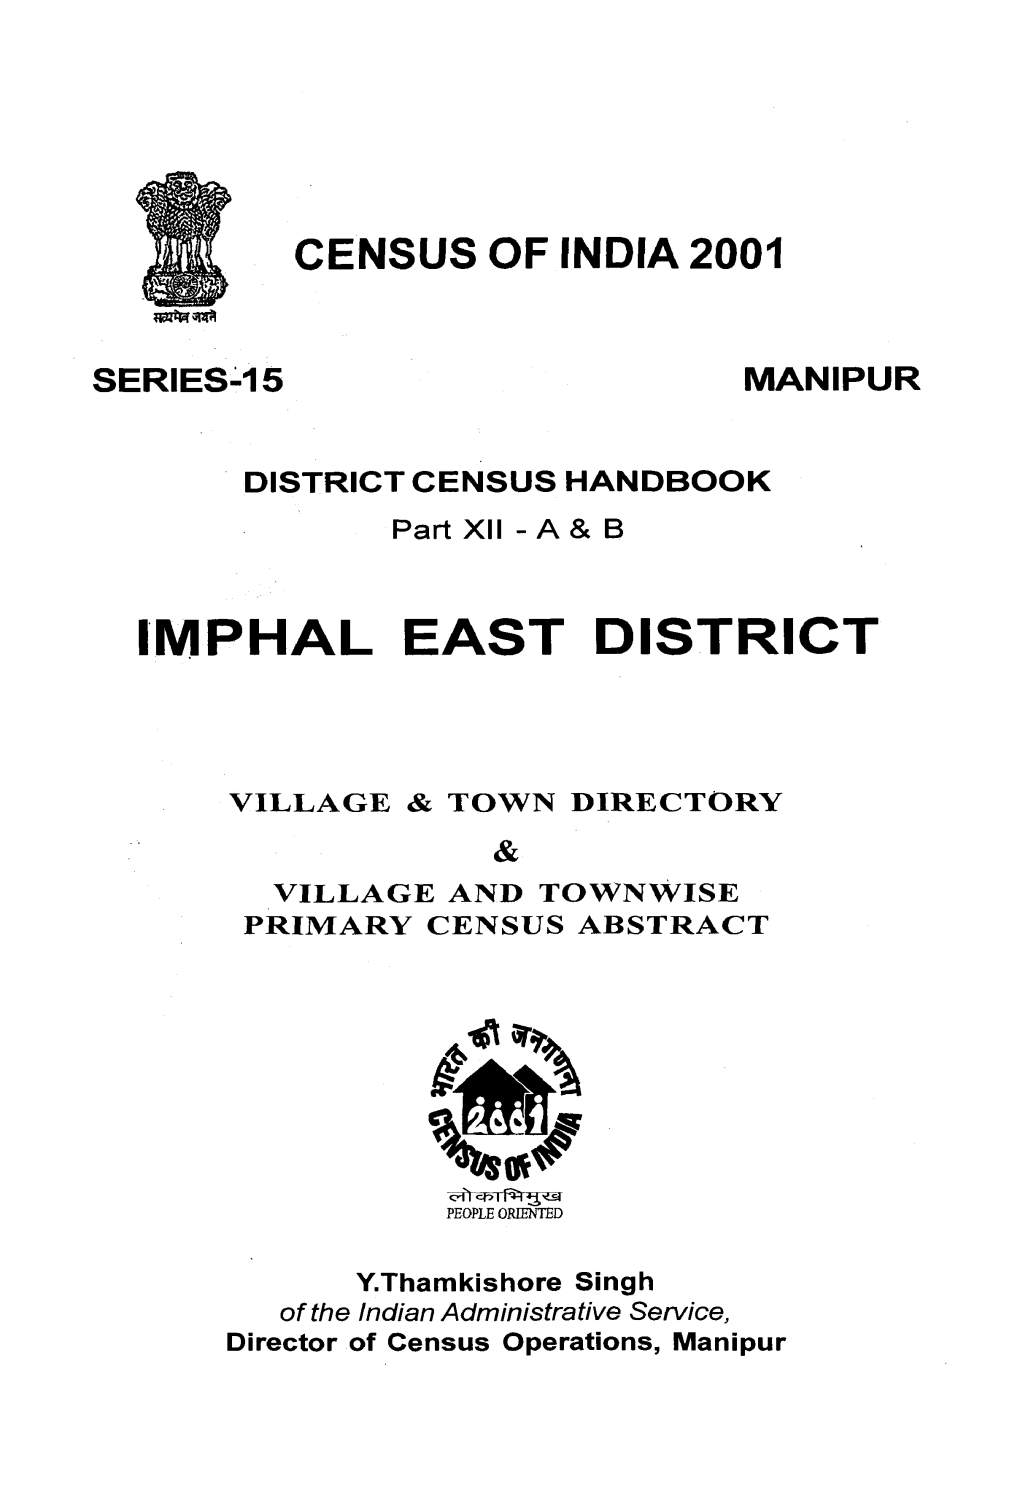 District Census Handbook, Imphal East, Part-XII a & B, Series-15